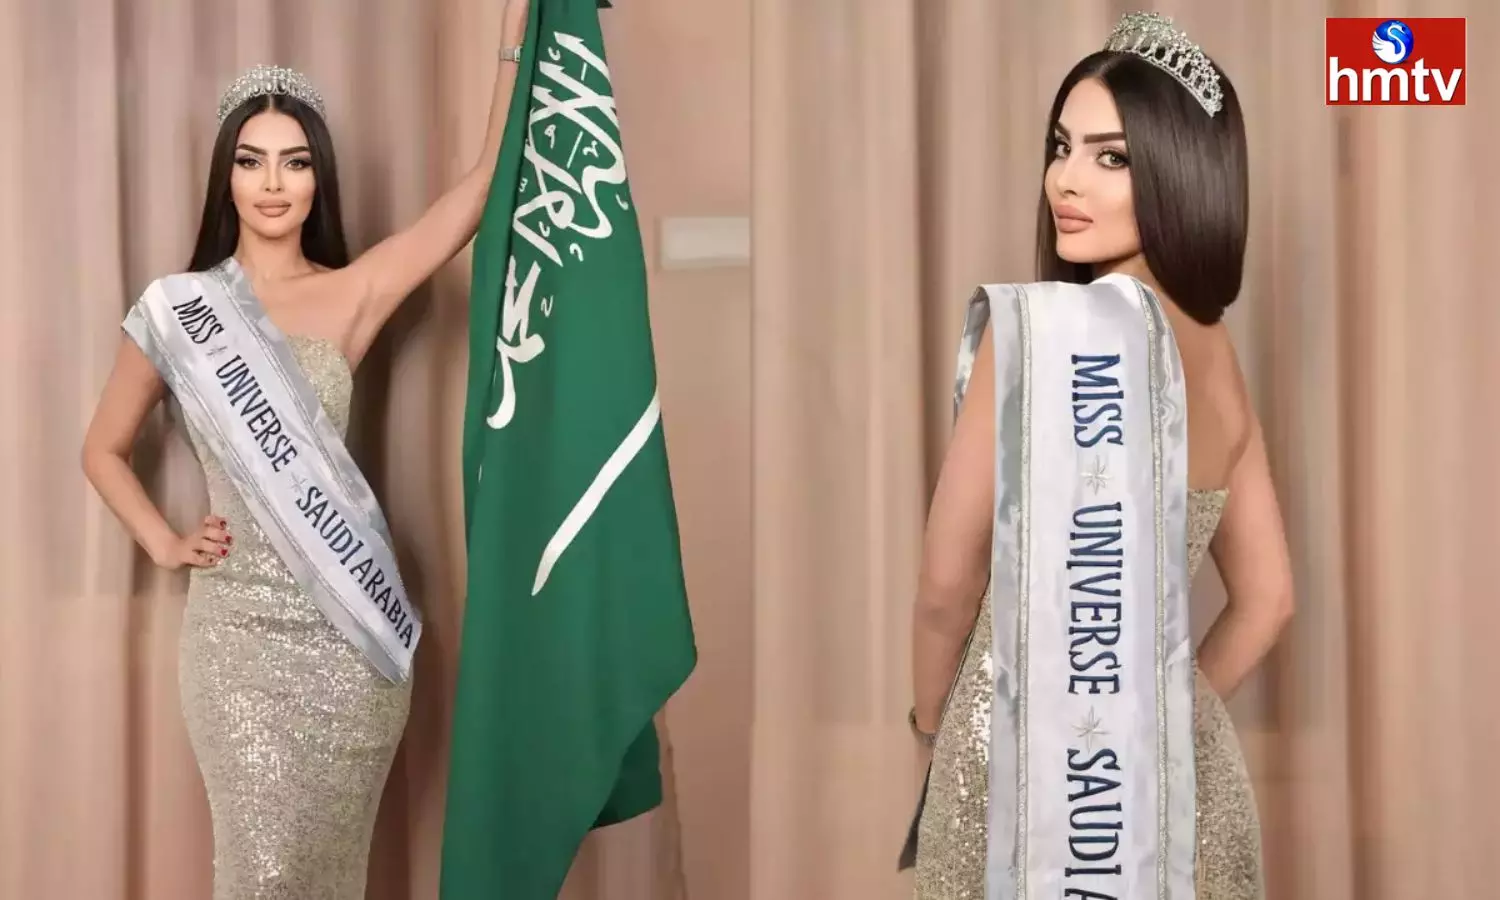 Saudi Arabia to Participate in Miss Universe for First Time